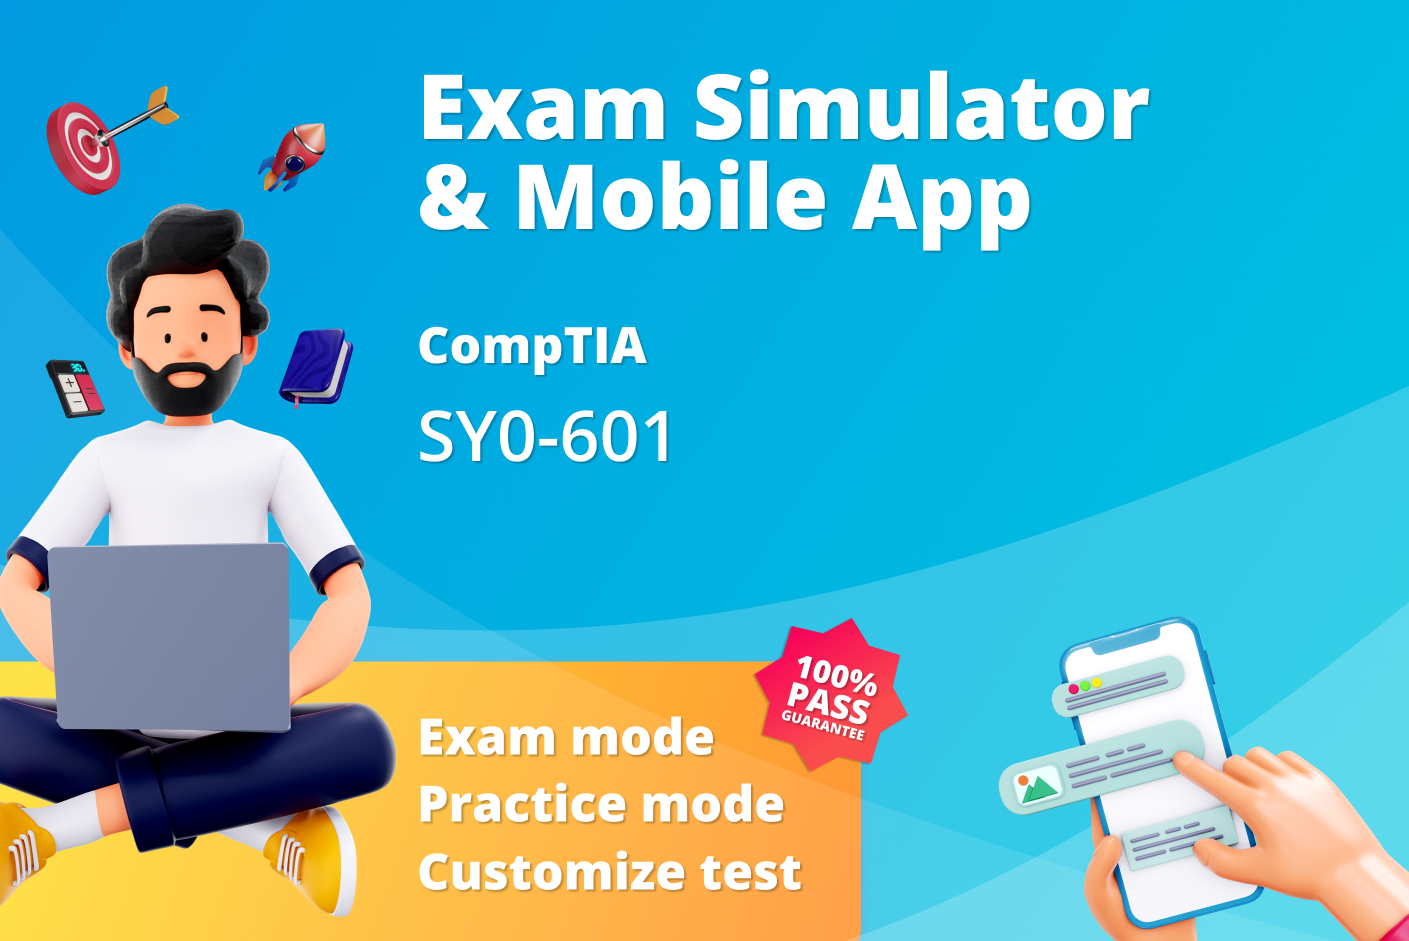 Comptia SY0-601 Mock Exam - Prepare for the certification with our comprehensive practice tests